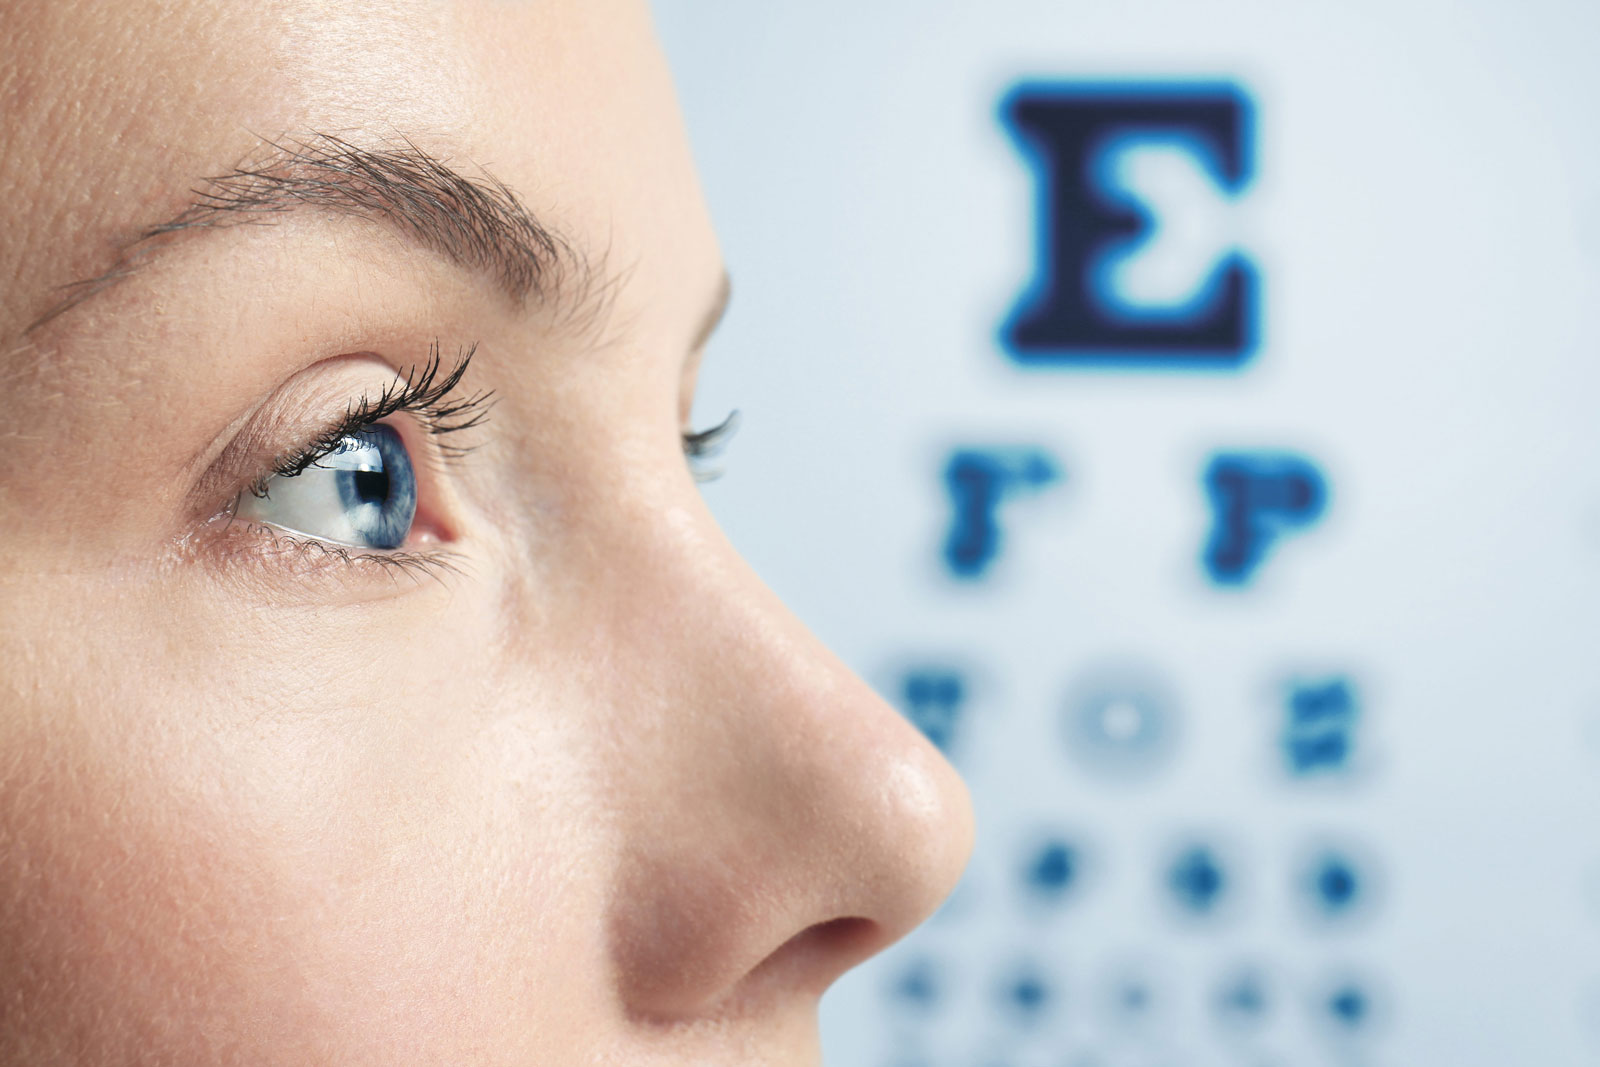 Patient Advantage helps patients pay for LASIK and other eye care procedures through a variety of lending programs.